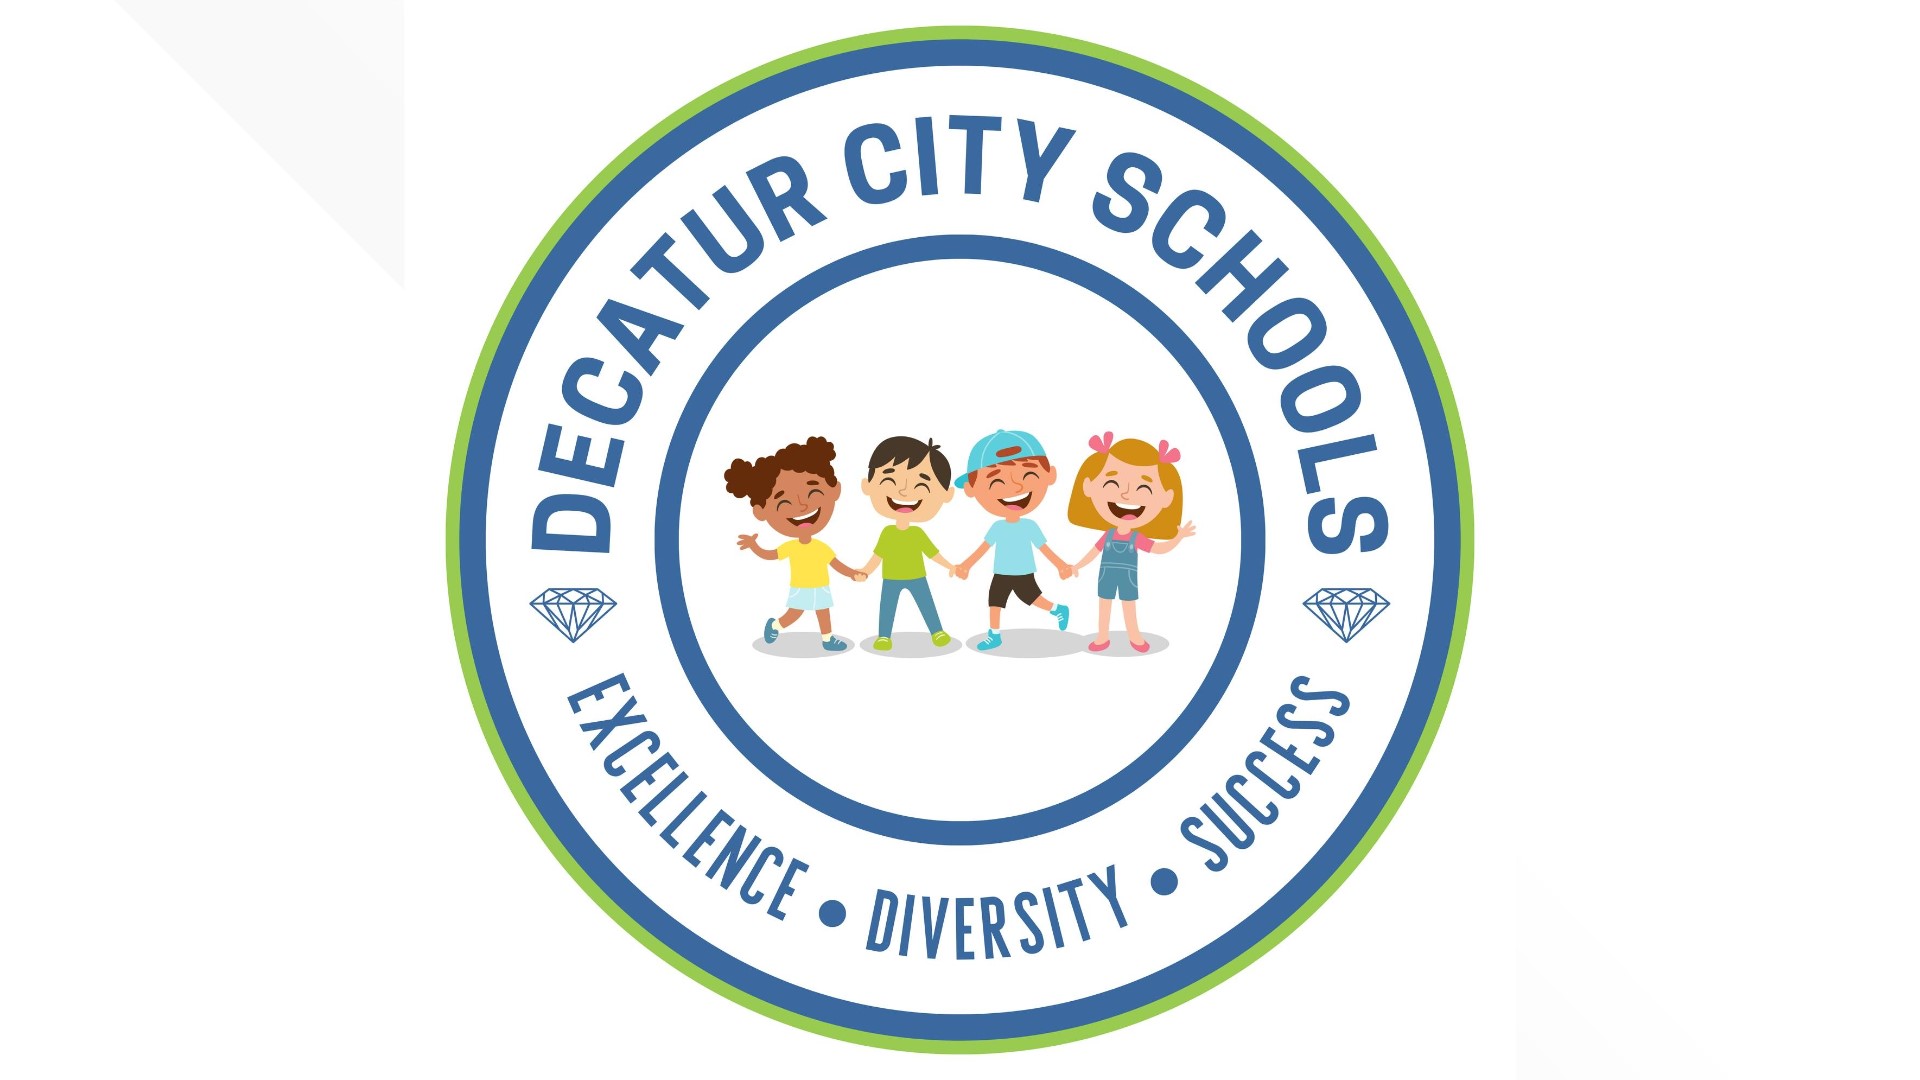 RAW: Interview with DCS Deputy Superintendent Dwight Satterfield (courtesy: Decatur City Schools)